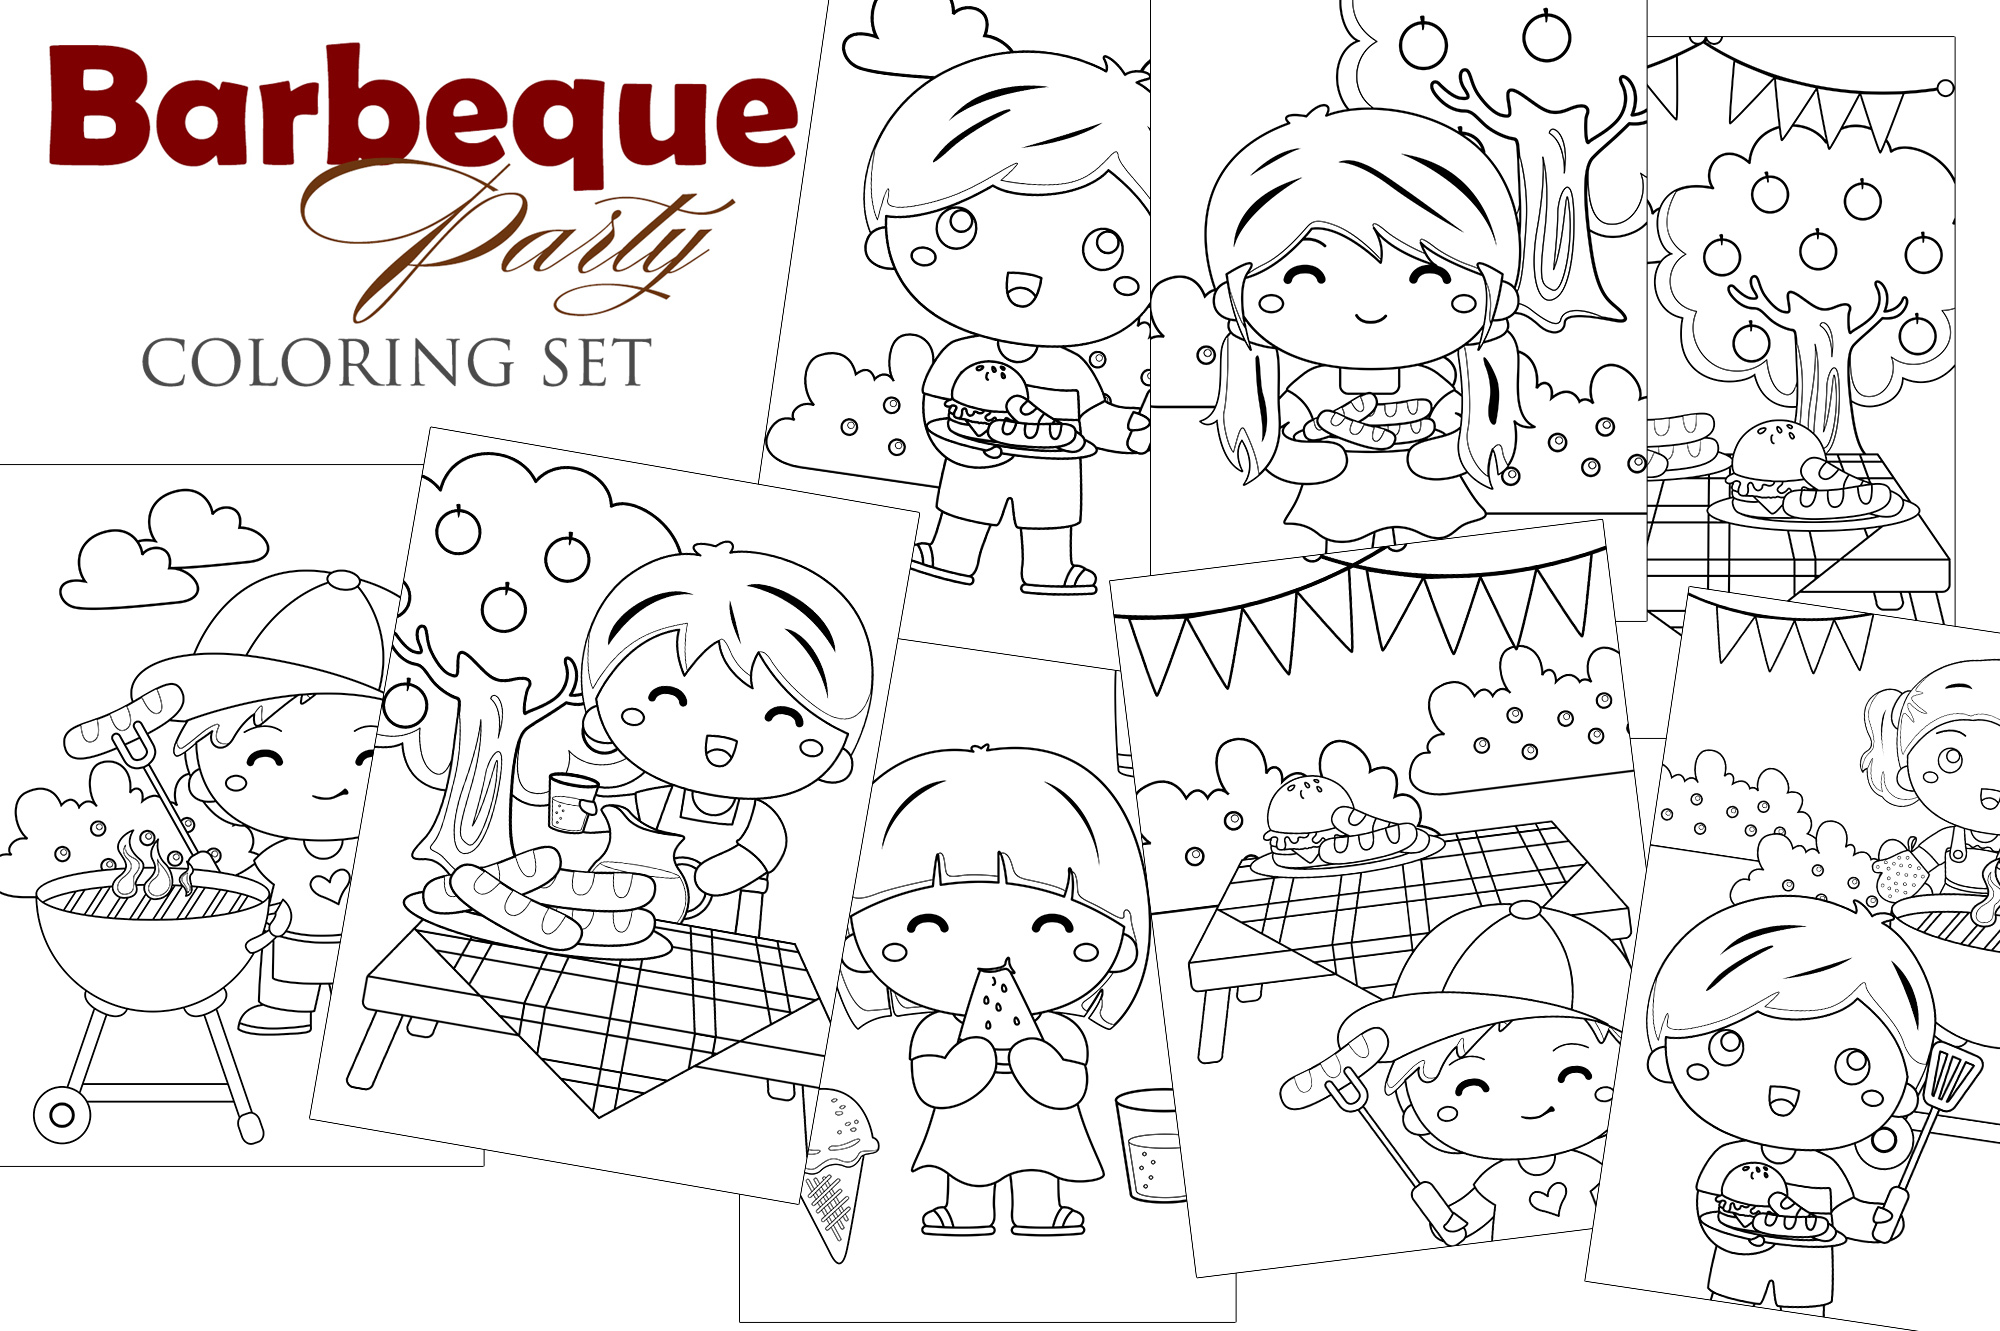 Set of coloring pages for a barbecue party.